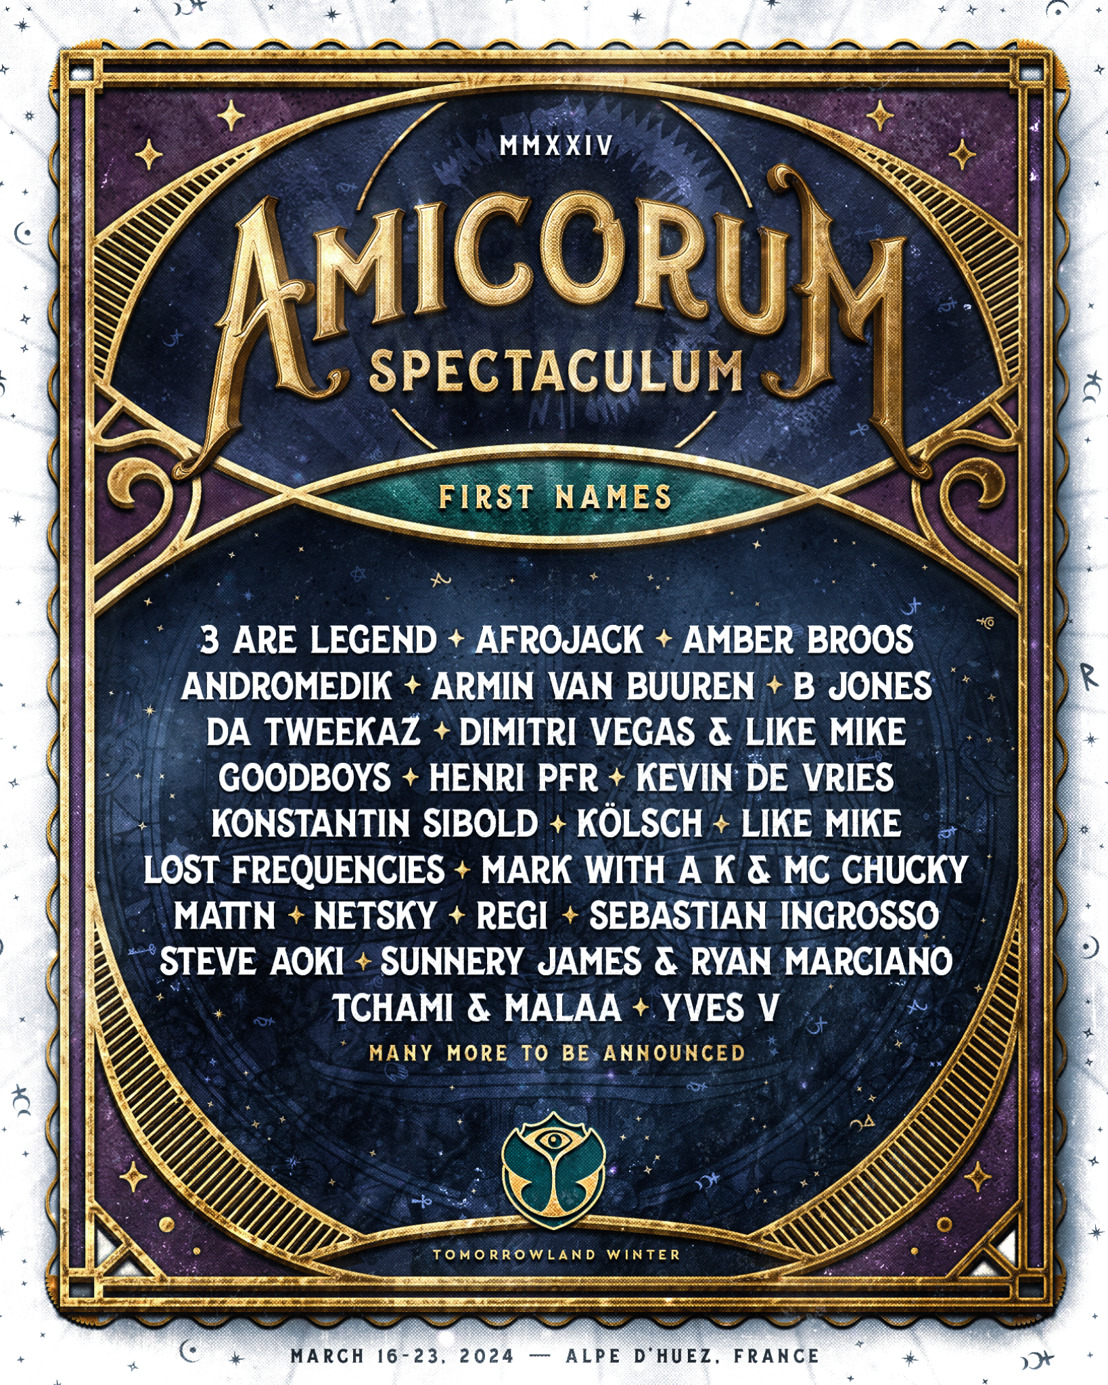 Tomorrowland Winter reveals the first names of the 2024 line-up